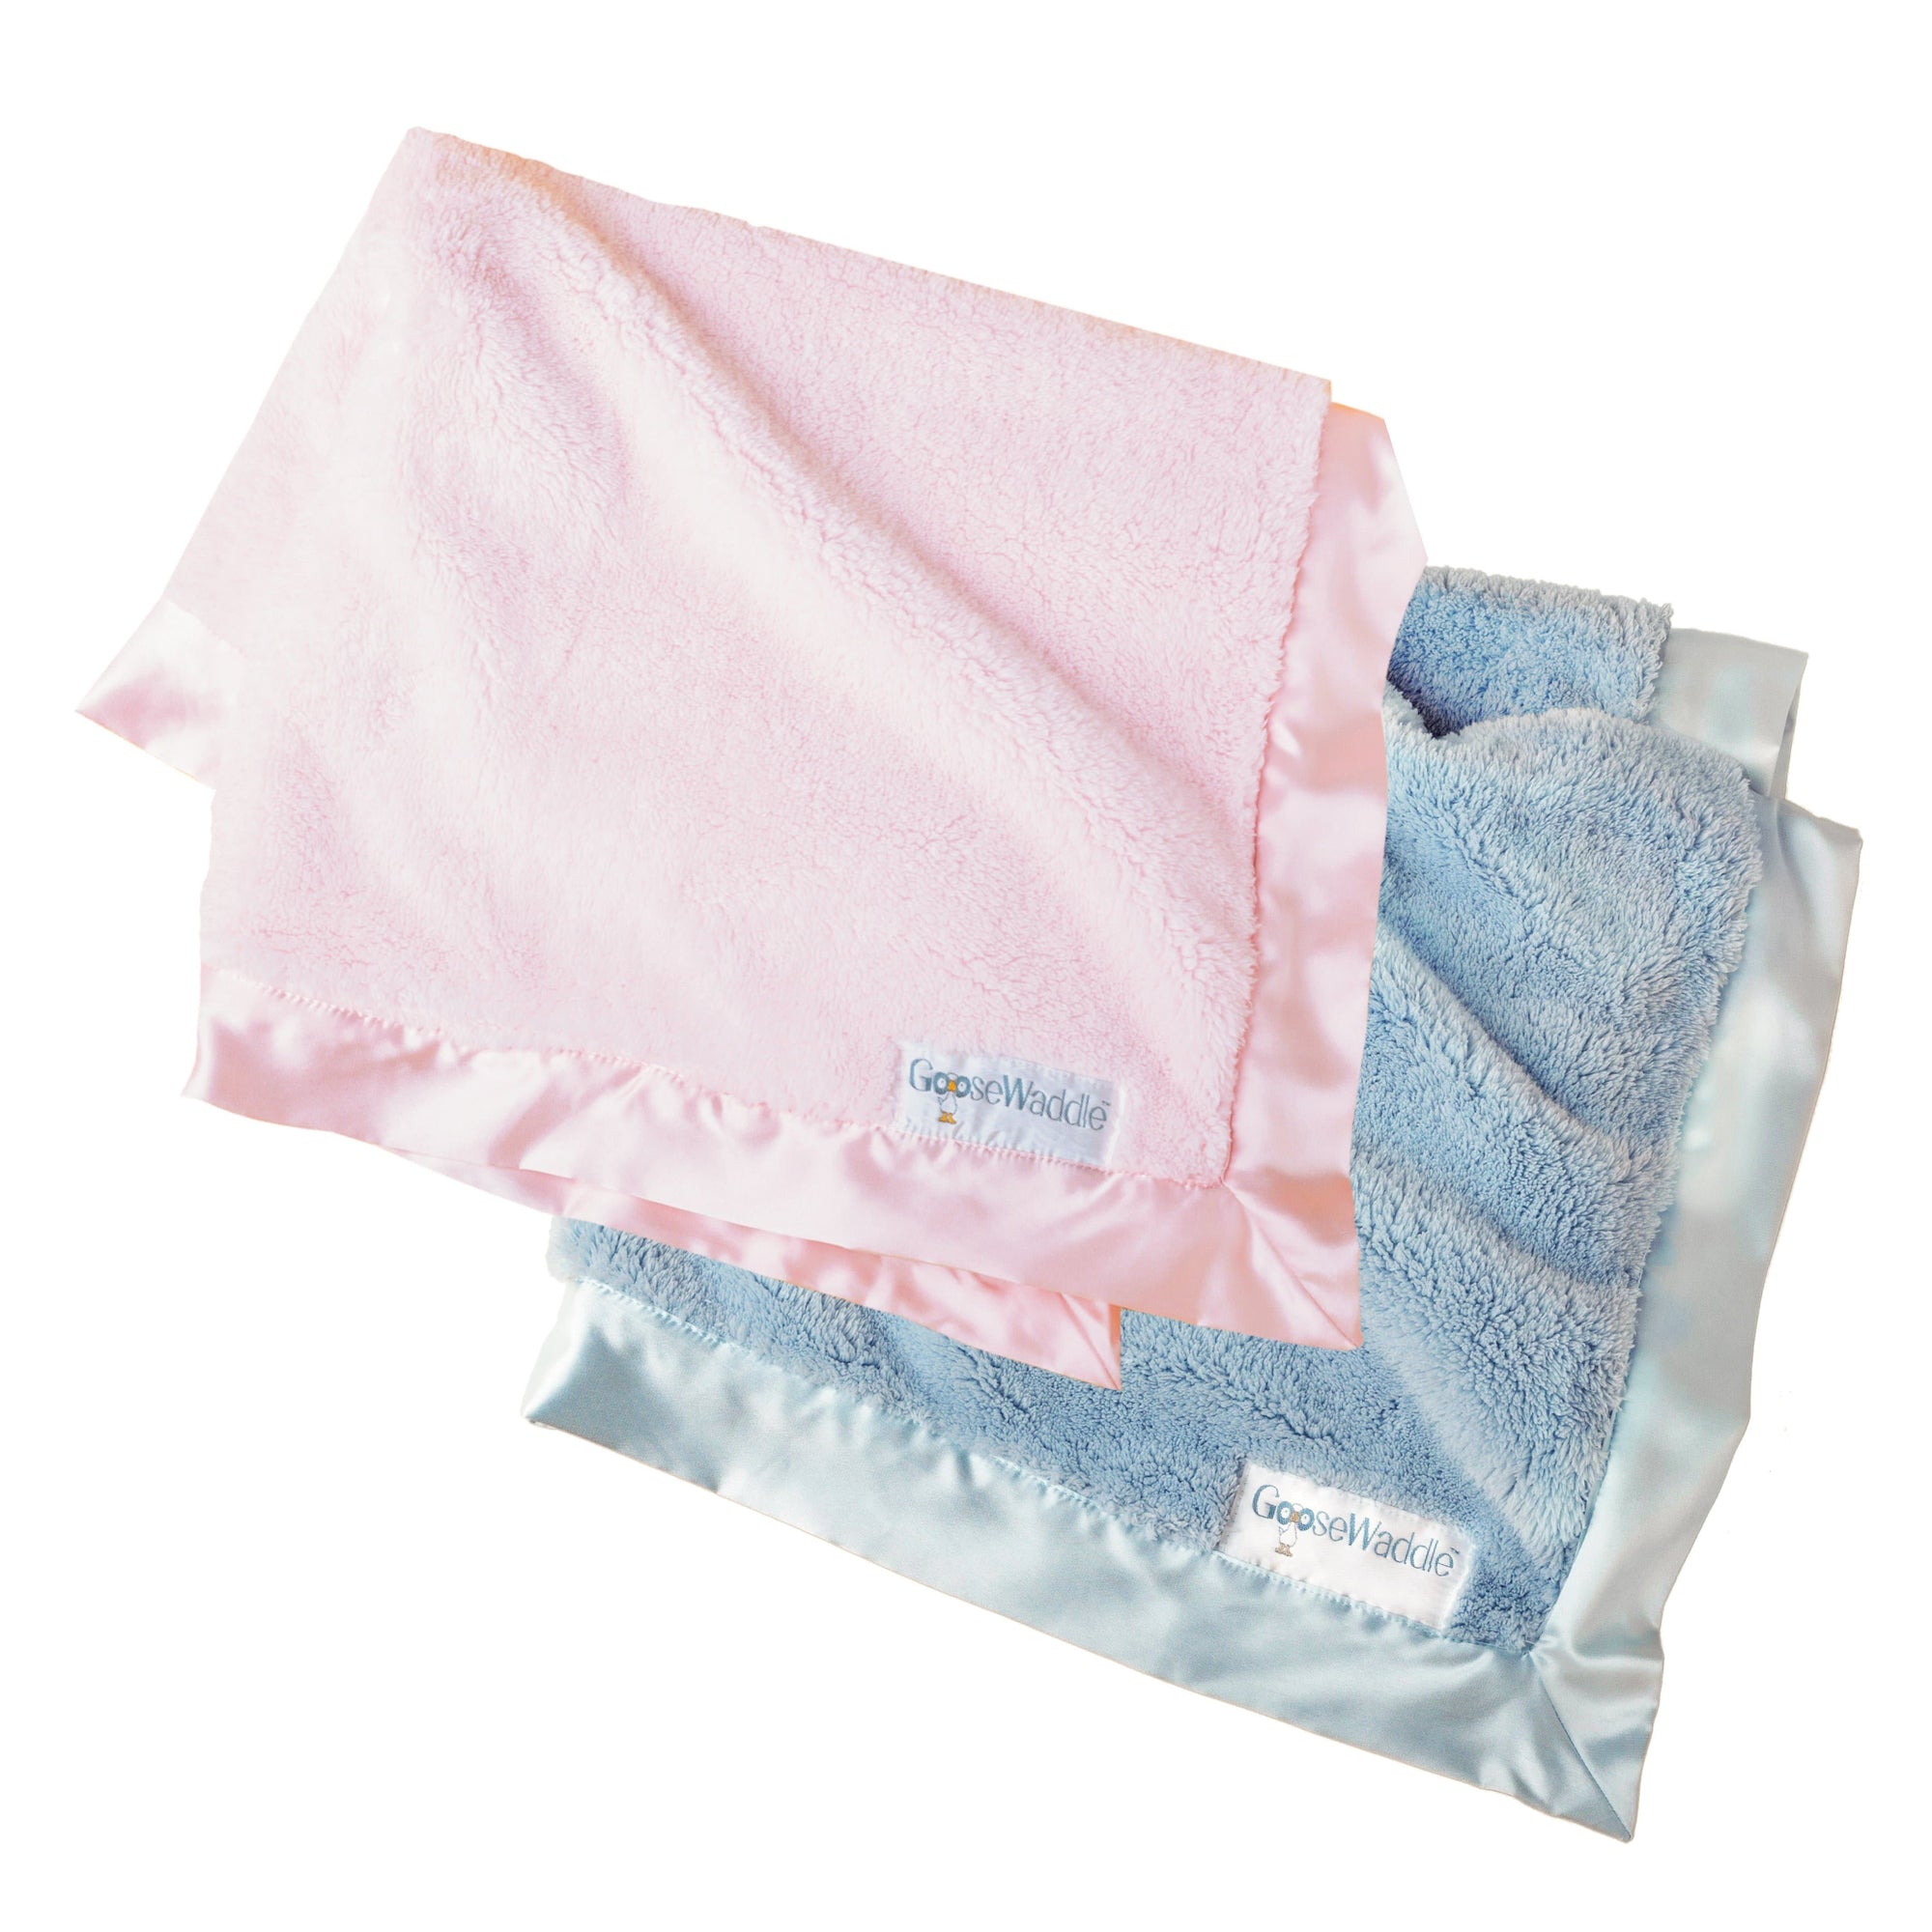 GooseWaddle Luxury Baby Blankets, Assorted Colors